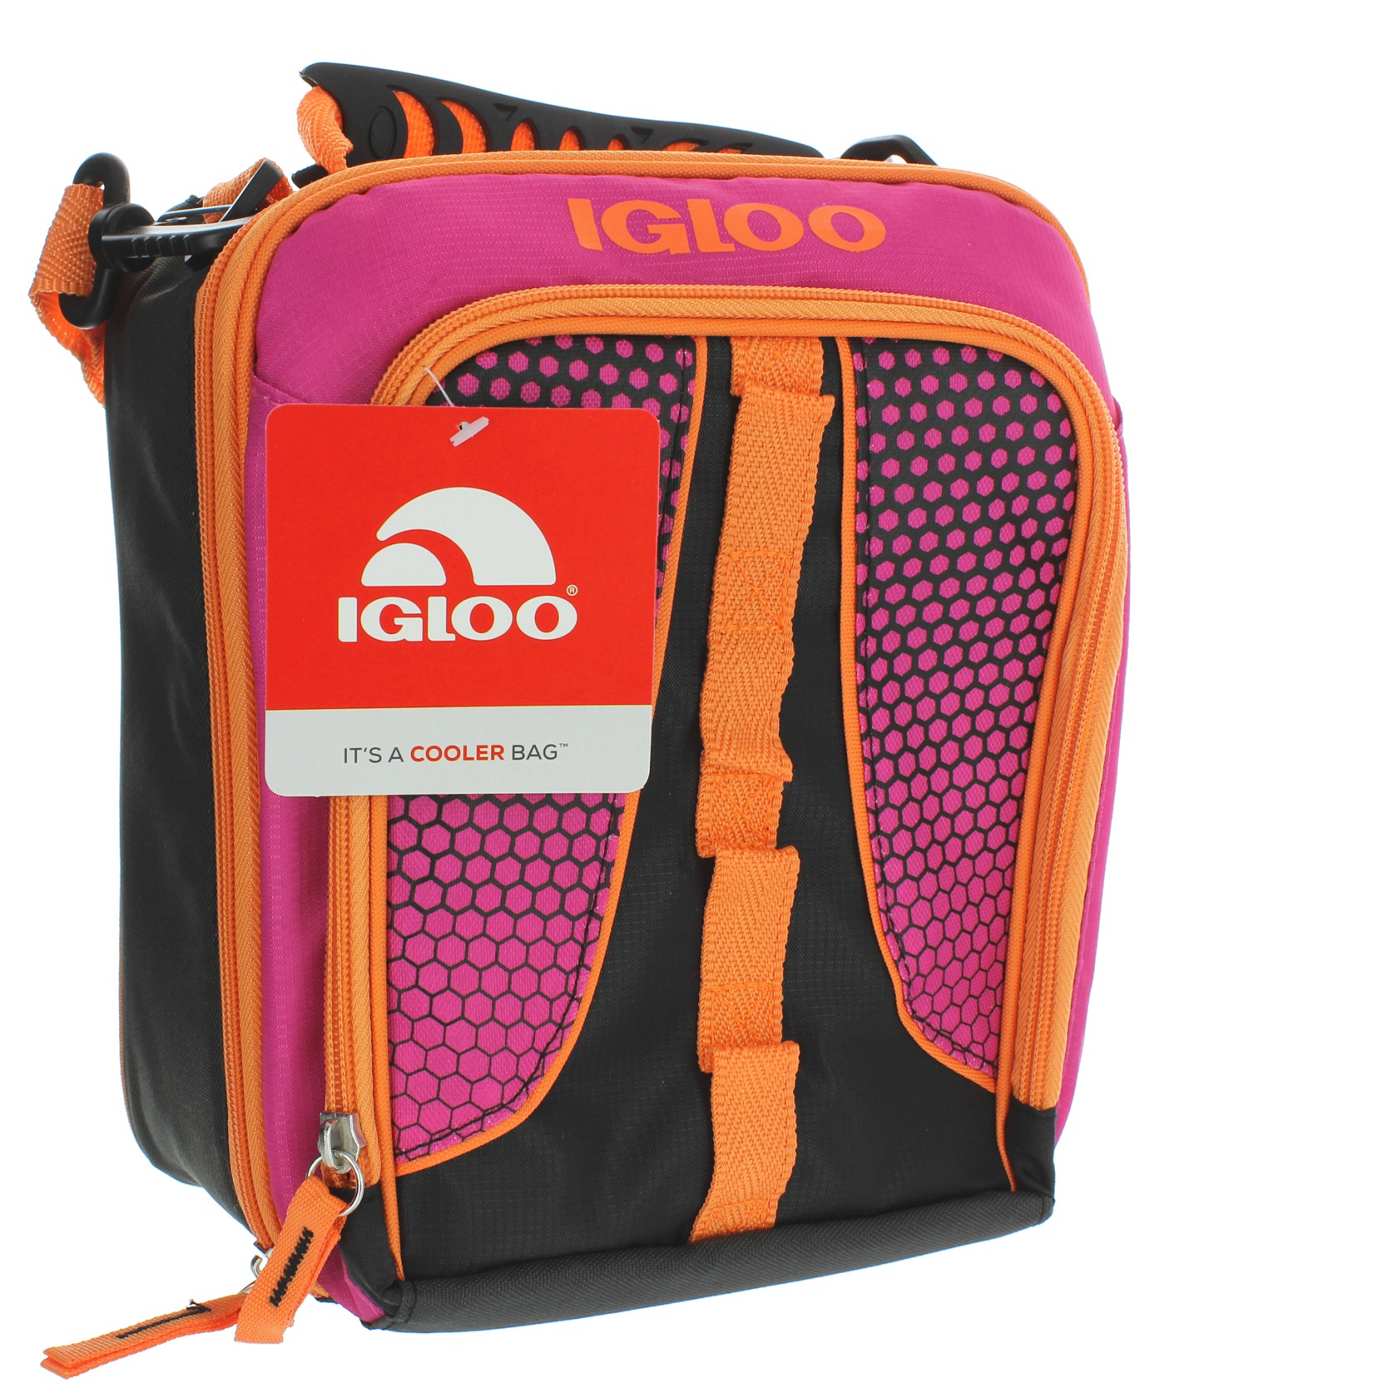 Igloo Vertical Lunch Kit Hot Brights Girls; image 1 of 3